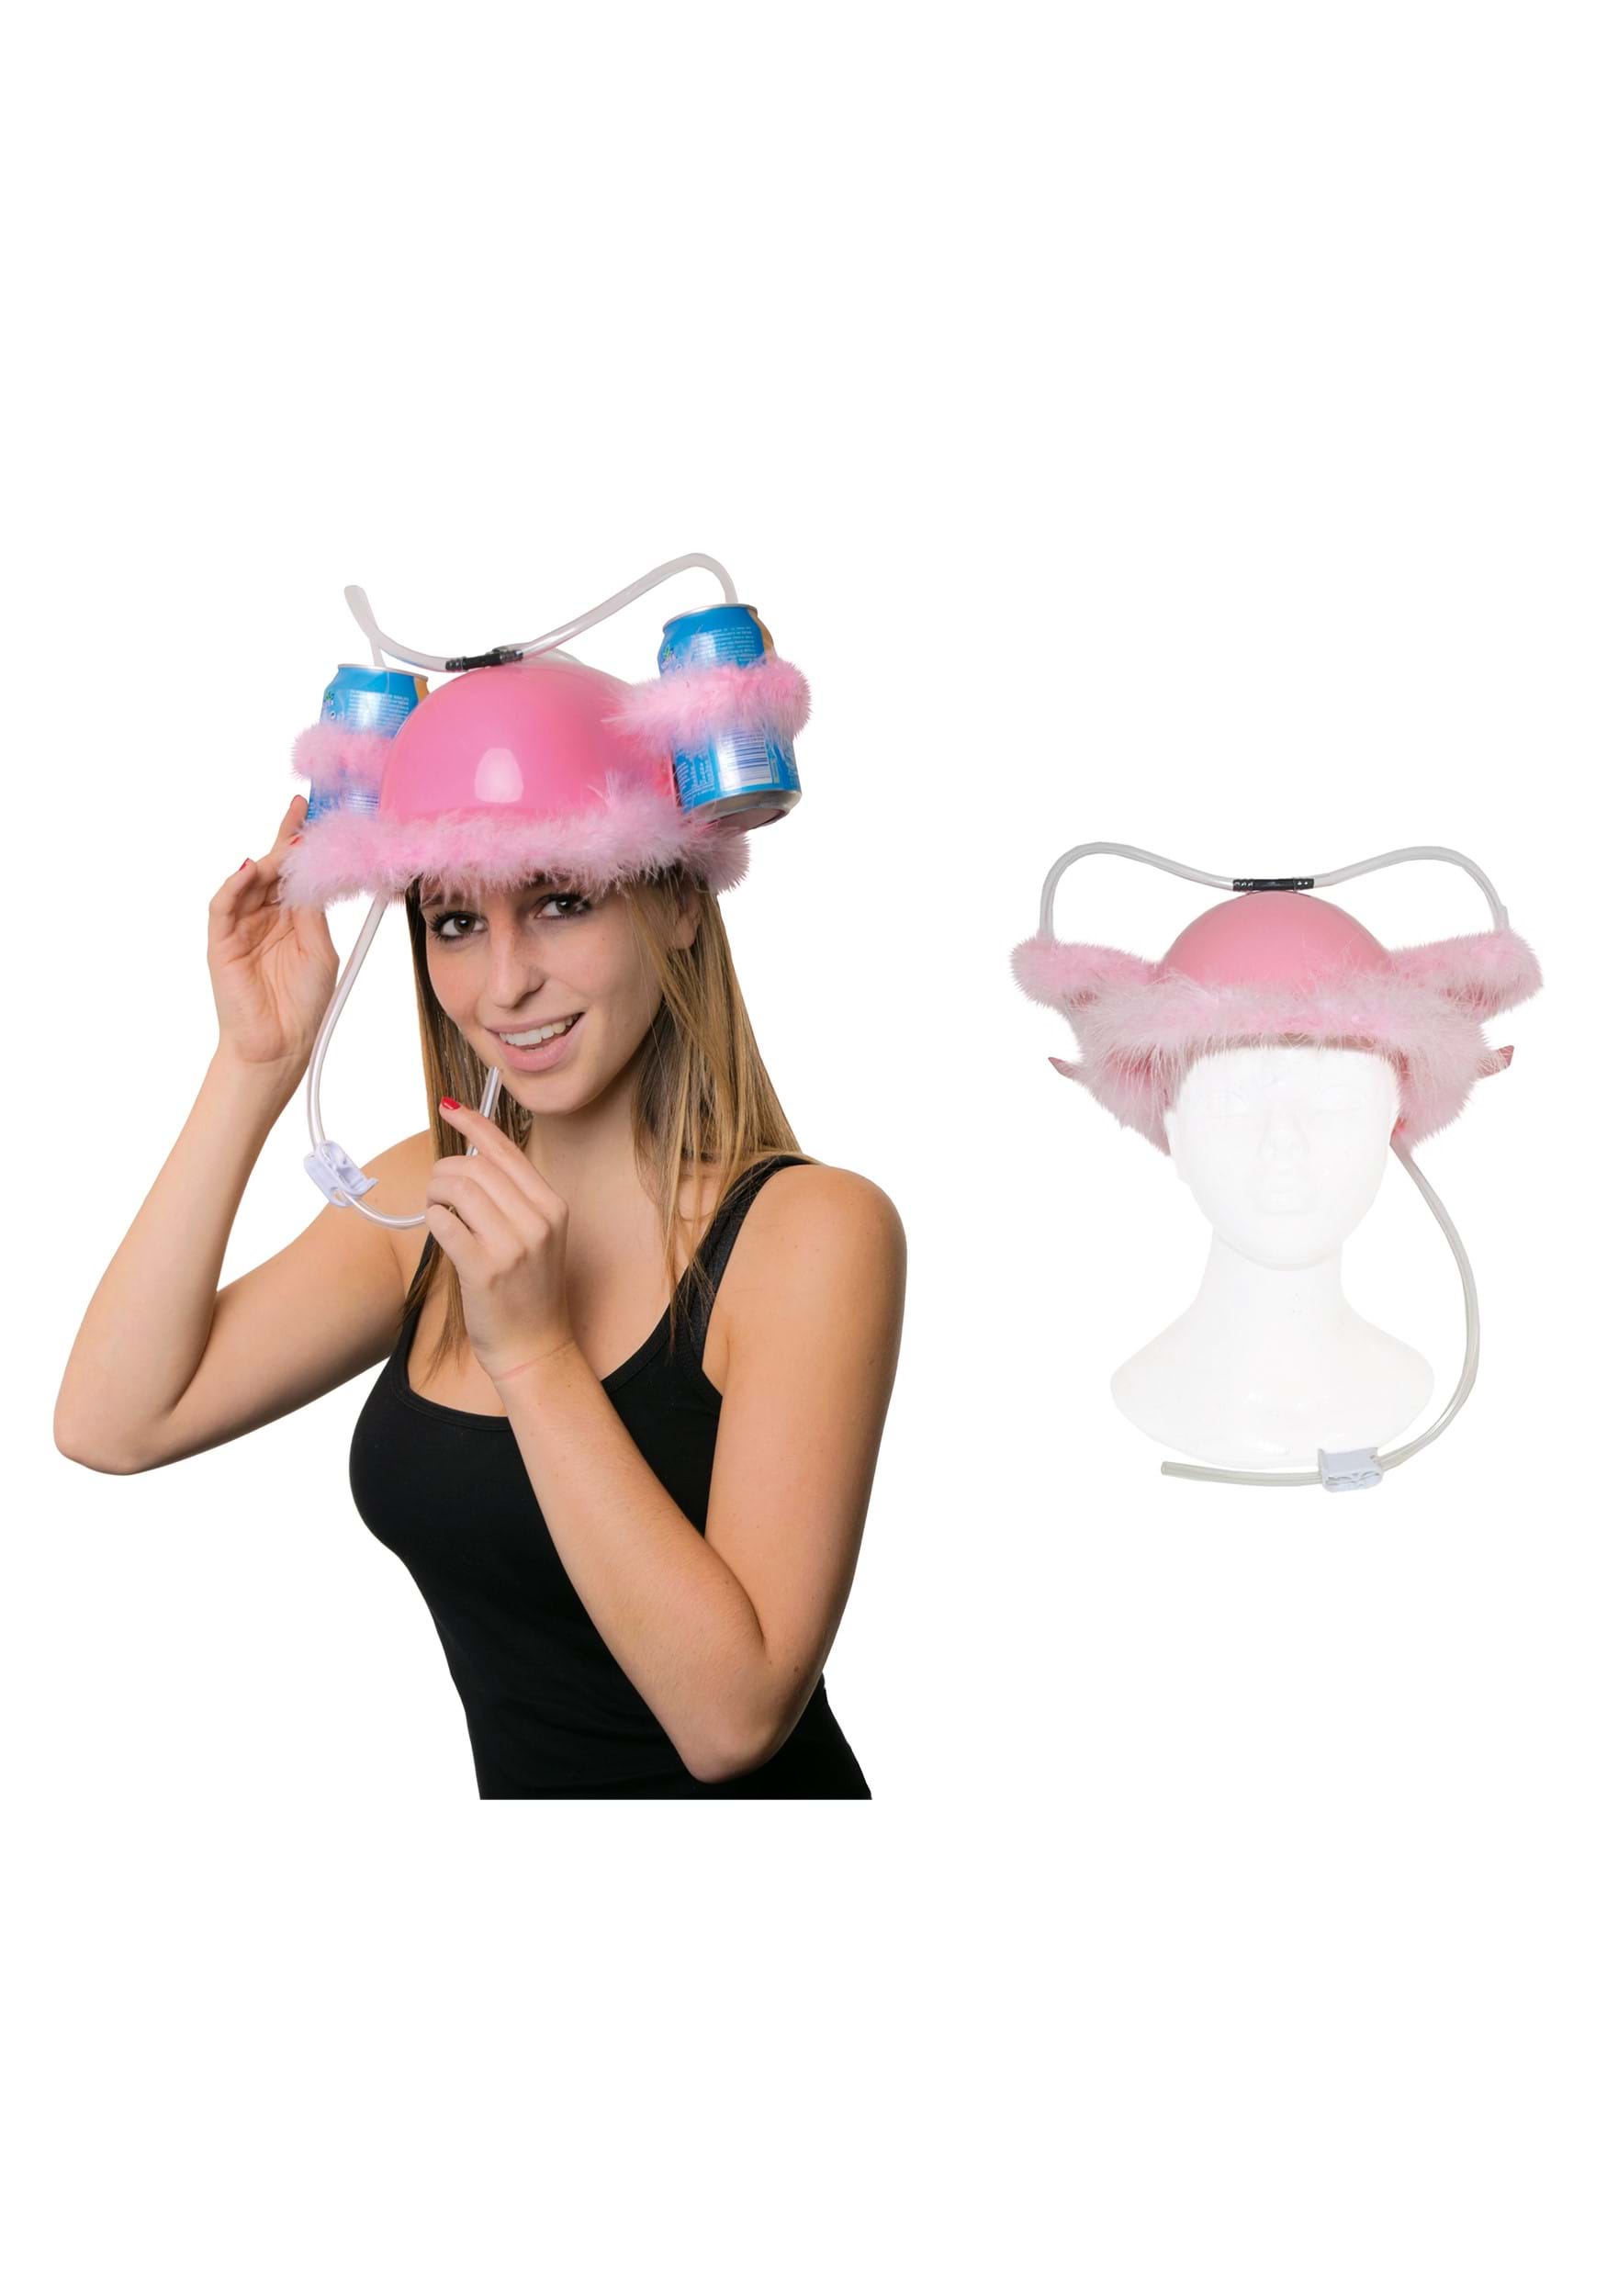 https://images.halloweencostumes.com/products/84906/1-1/pink-feather-trim-drinking-hat.jpg